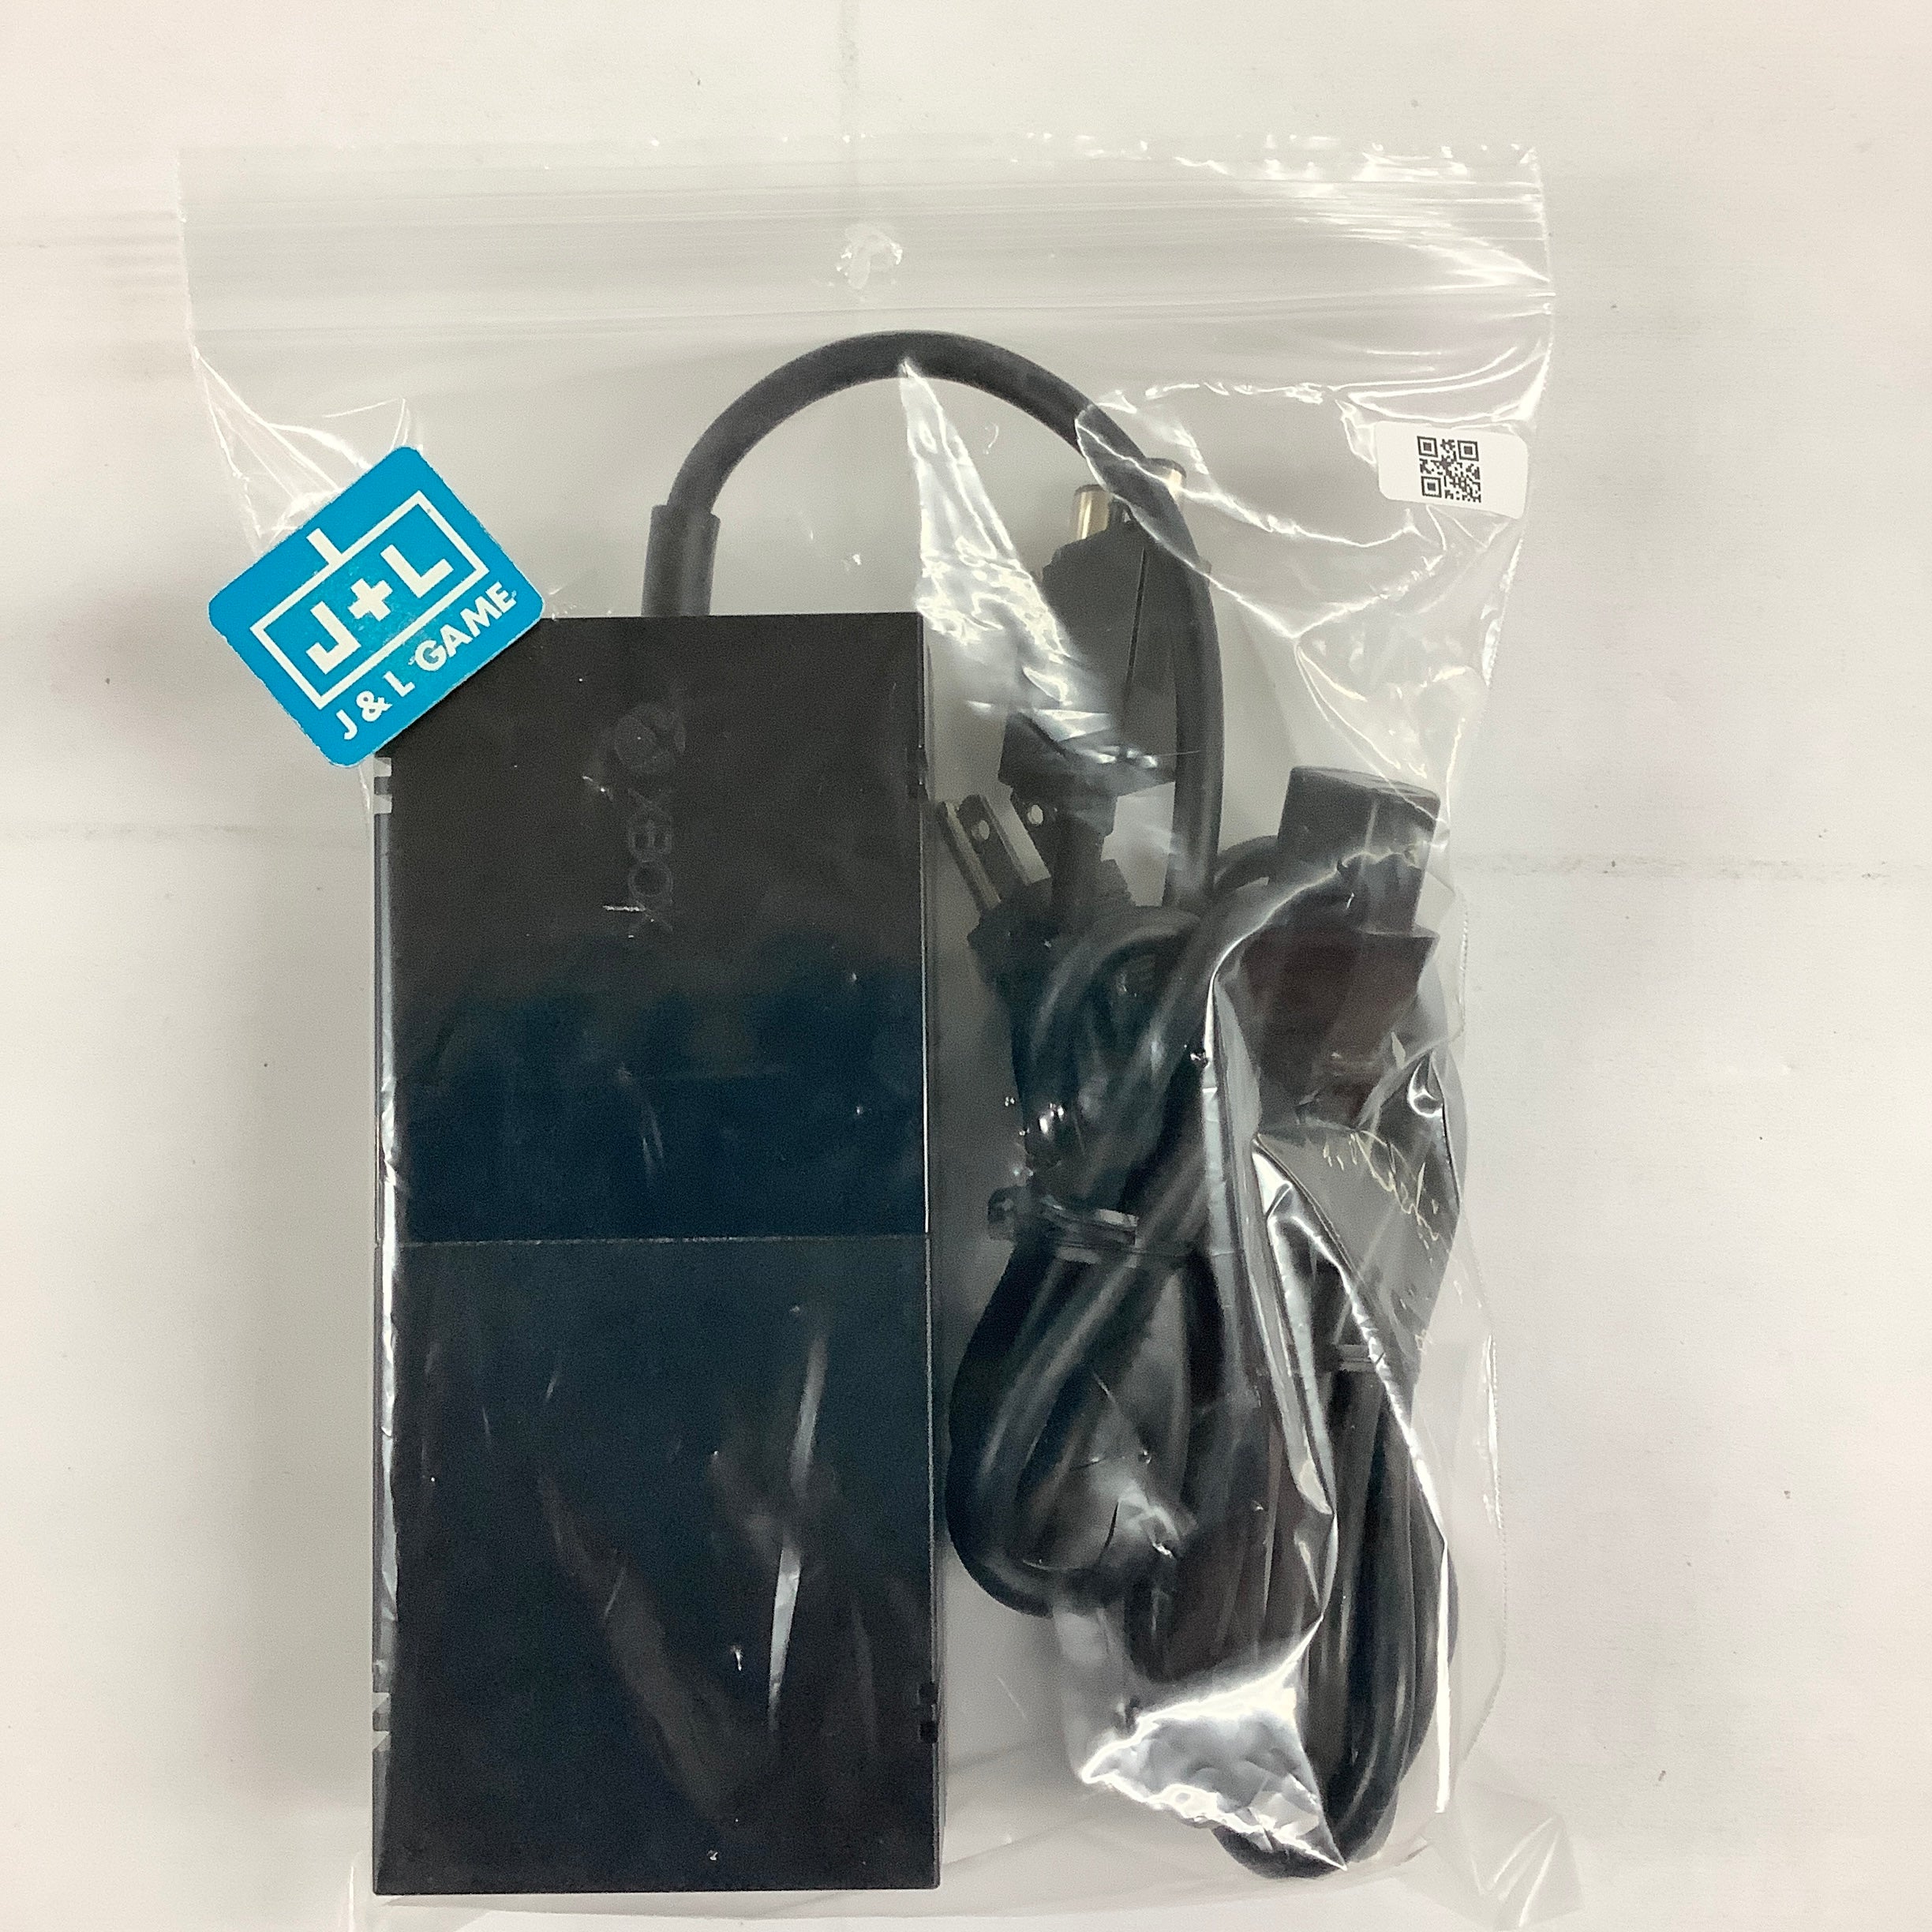 Microsoft Power Supply AC Adapter for Xbox One - (XB1) Xbox One [Pre-Owned] Accessories Microsoft   